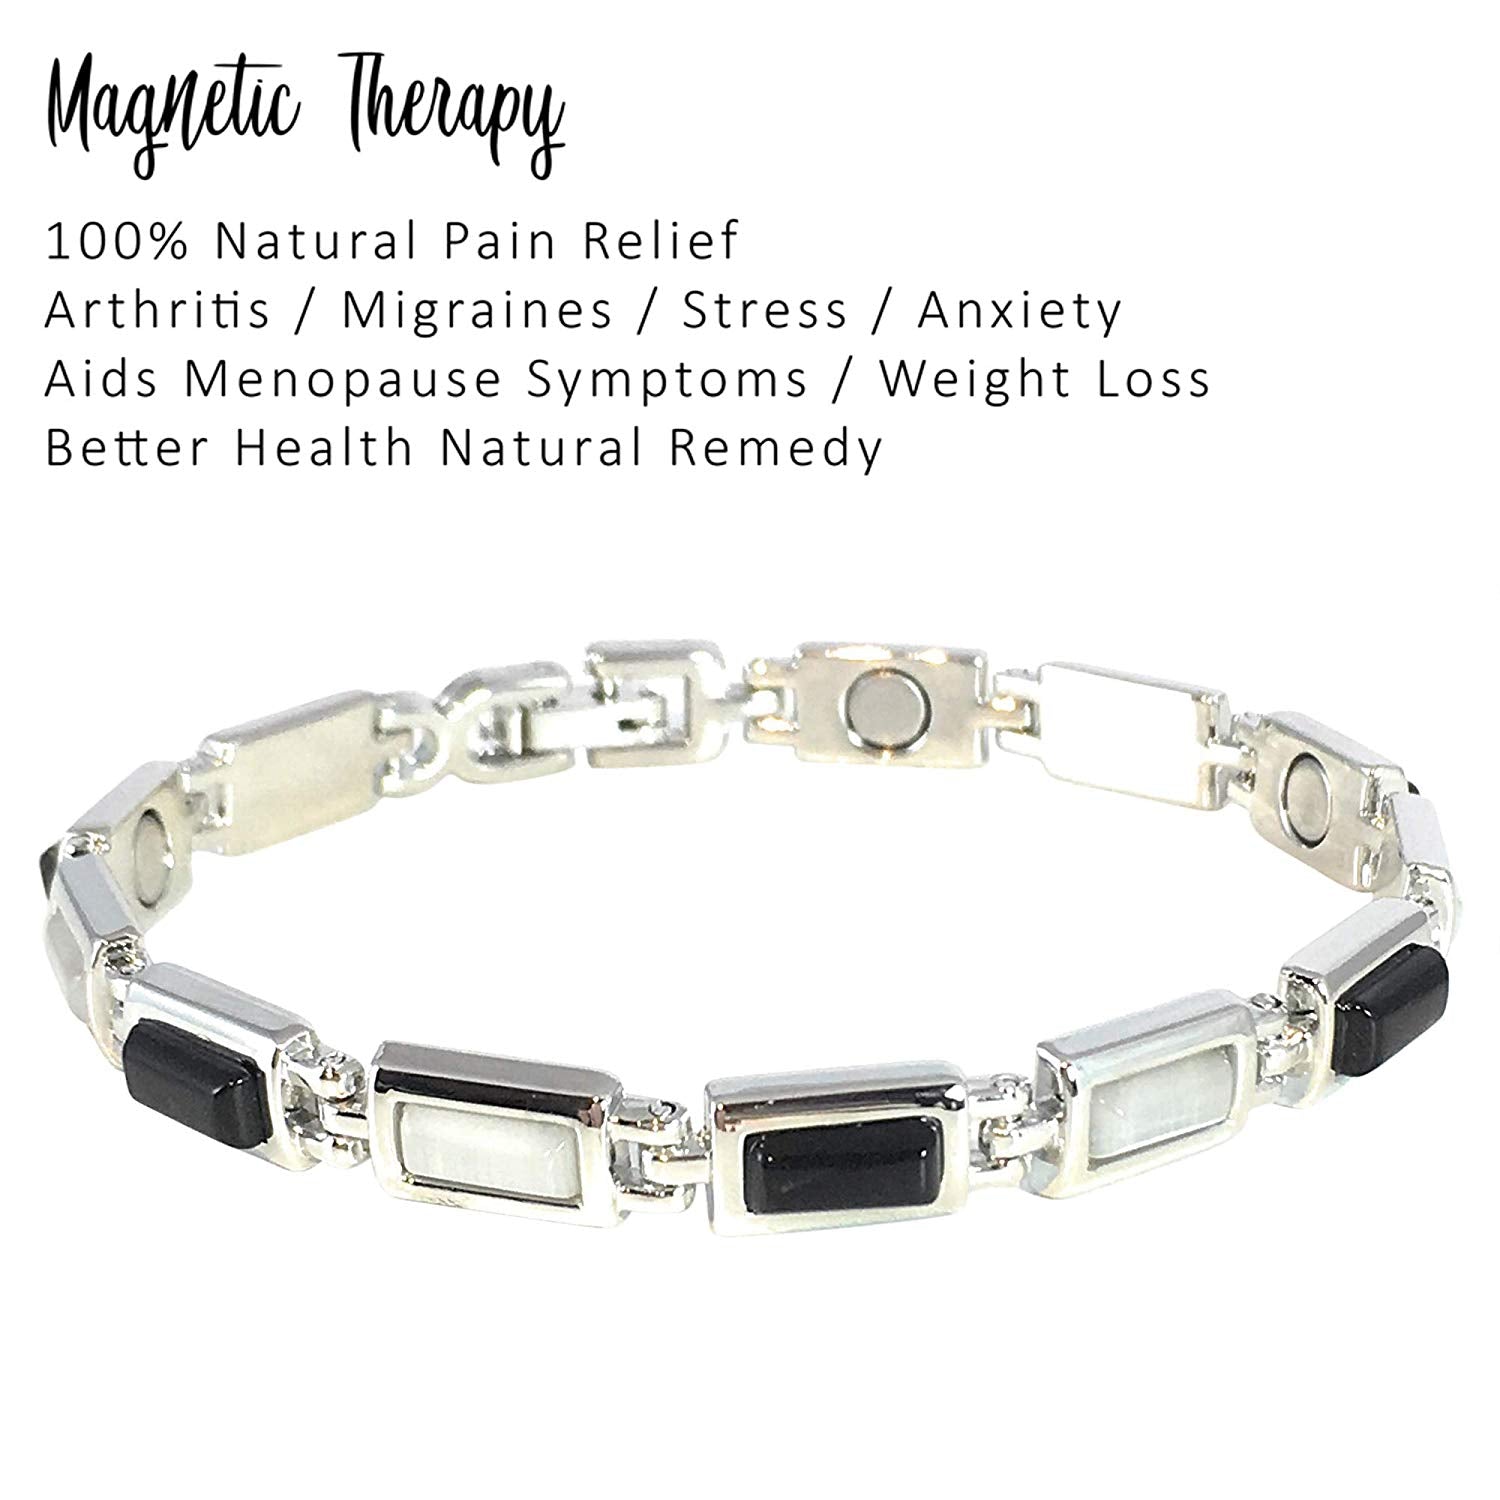 Magnetic Therapy Bracelet for Women - Retro Design with Natural Pain Relief Magnets for Arthritis Rheumatism and Menopause Relief - with Jewellery Gift Box